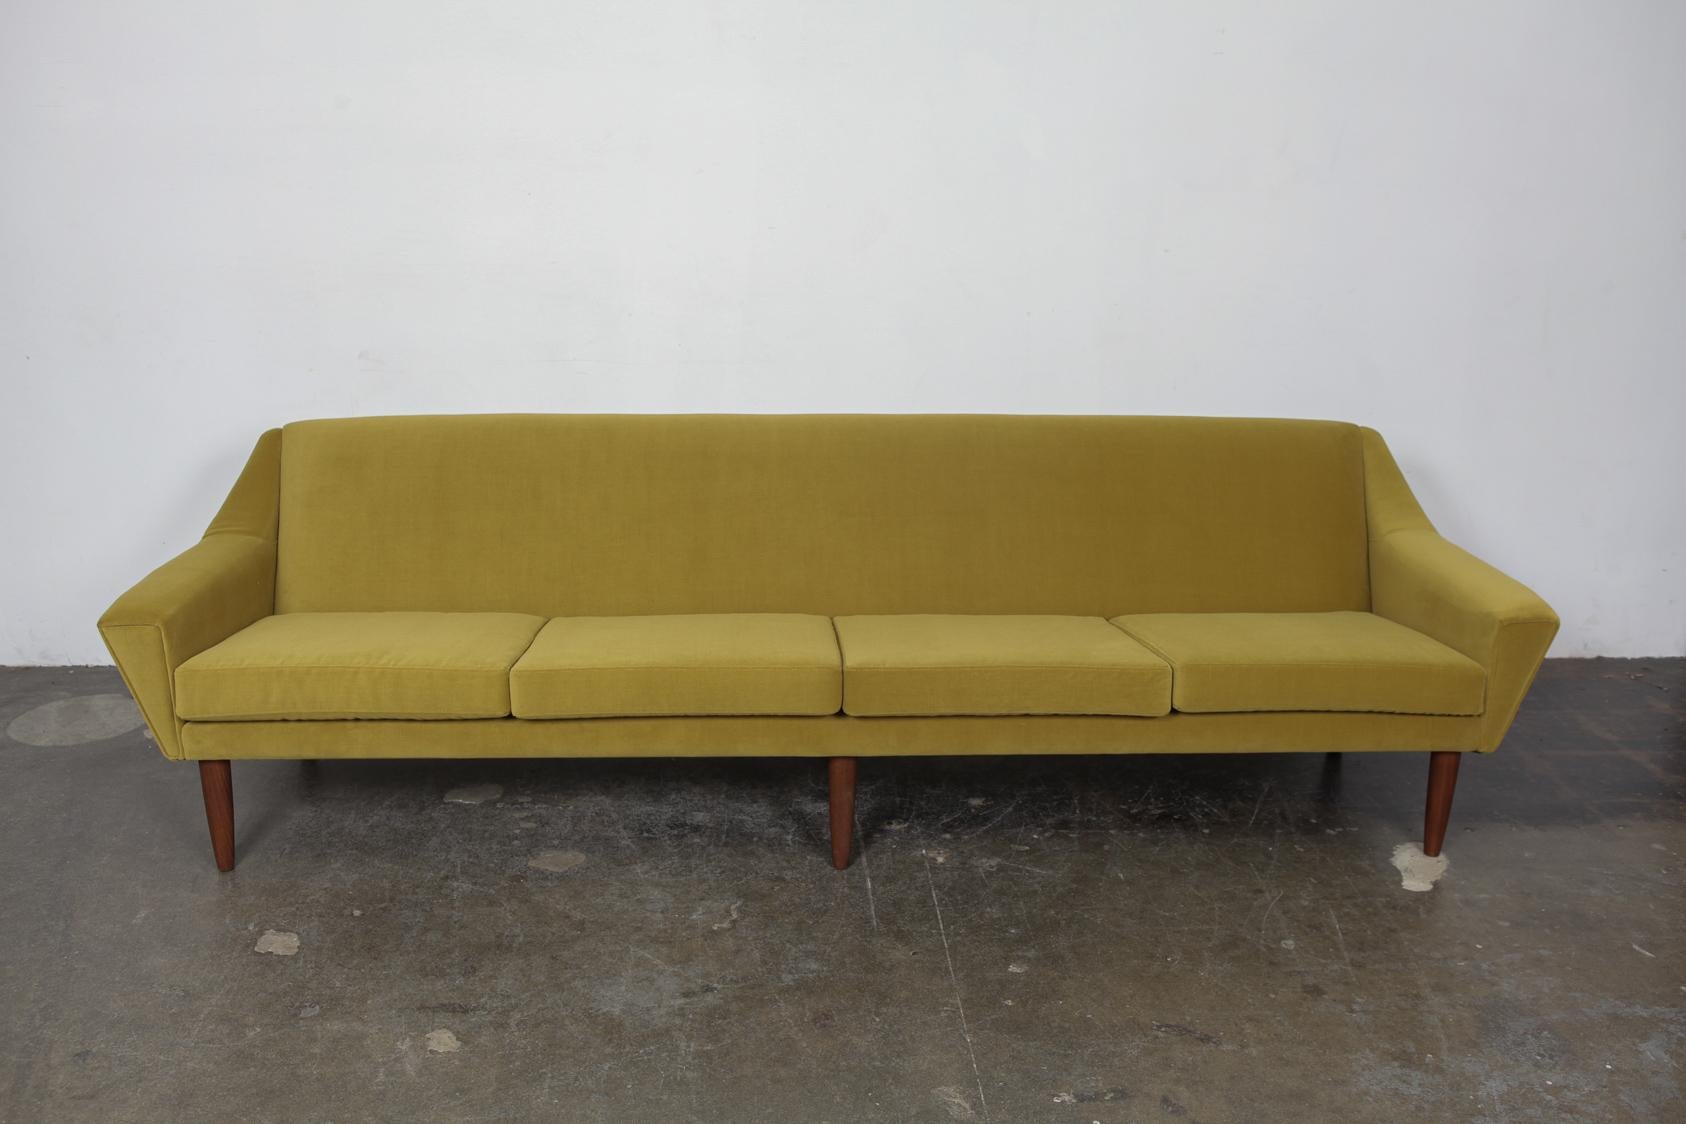 Classically-styled Danish midcentury sofa, circa 1960s. Tight back, loose cushion with beautiful curving style arms gives this a sleek silhouette. Newly upholstered in a green velvet fabric. Sofa sits on 6 solid teak tapering legs which have been